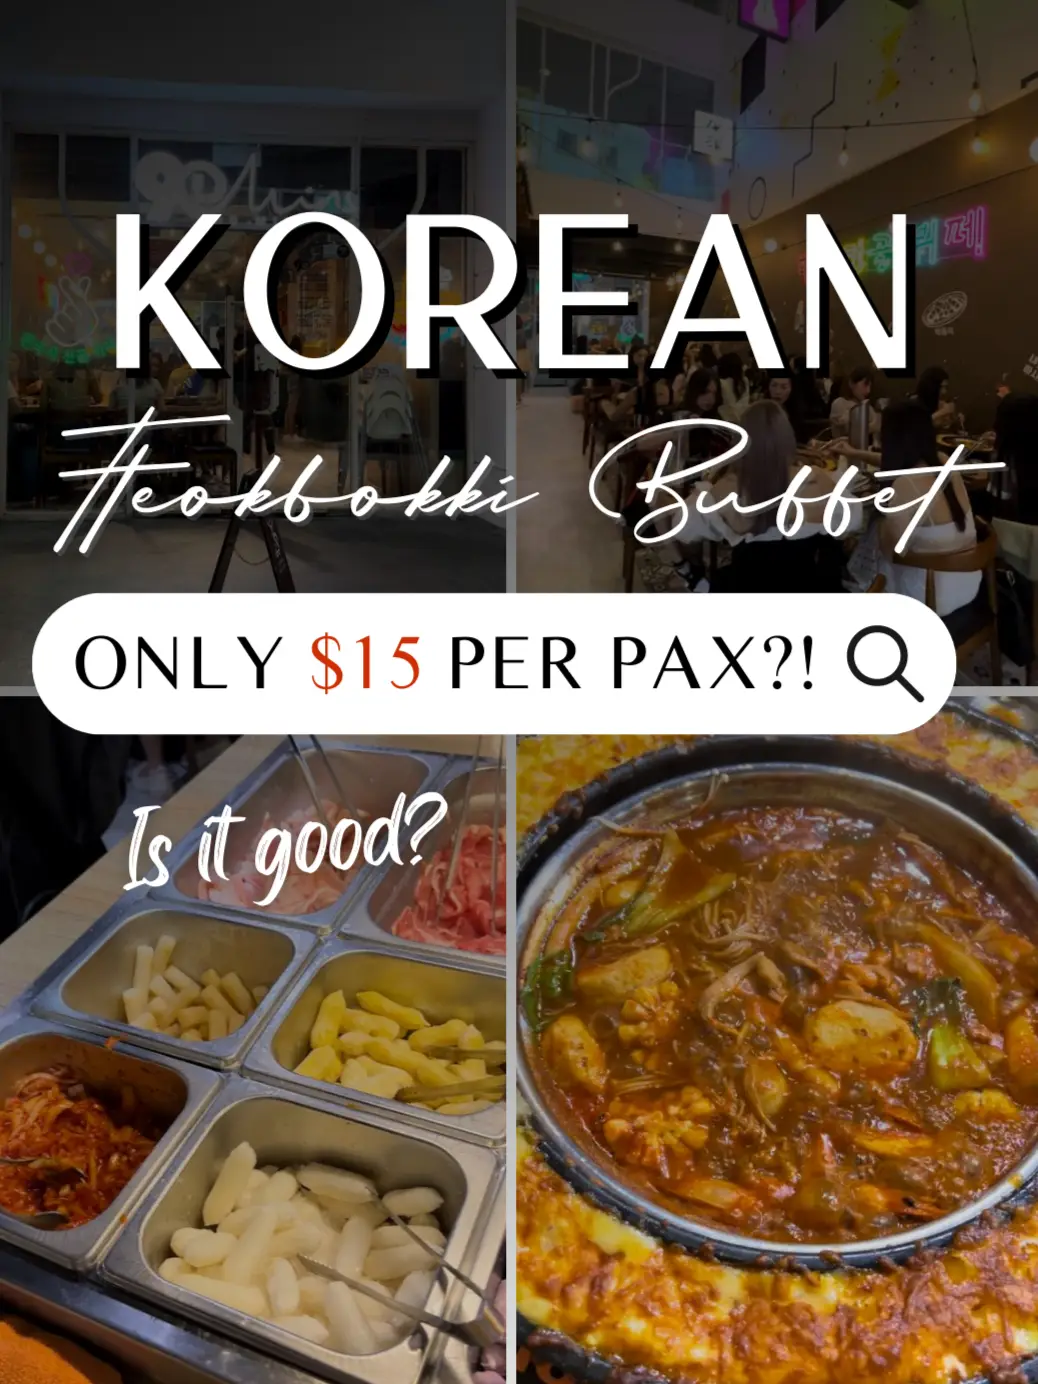 FREE FLOW ALL DAY $15/pax KOREAN BUFFET?! 🤔's images